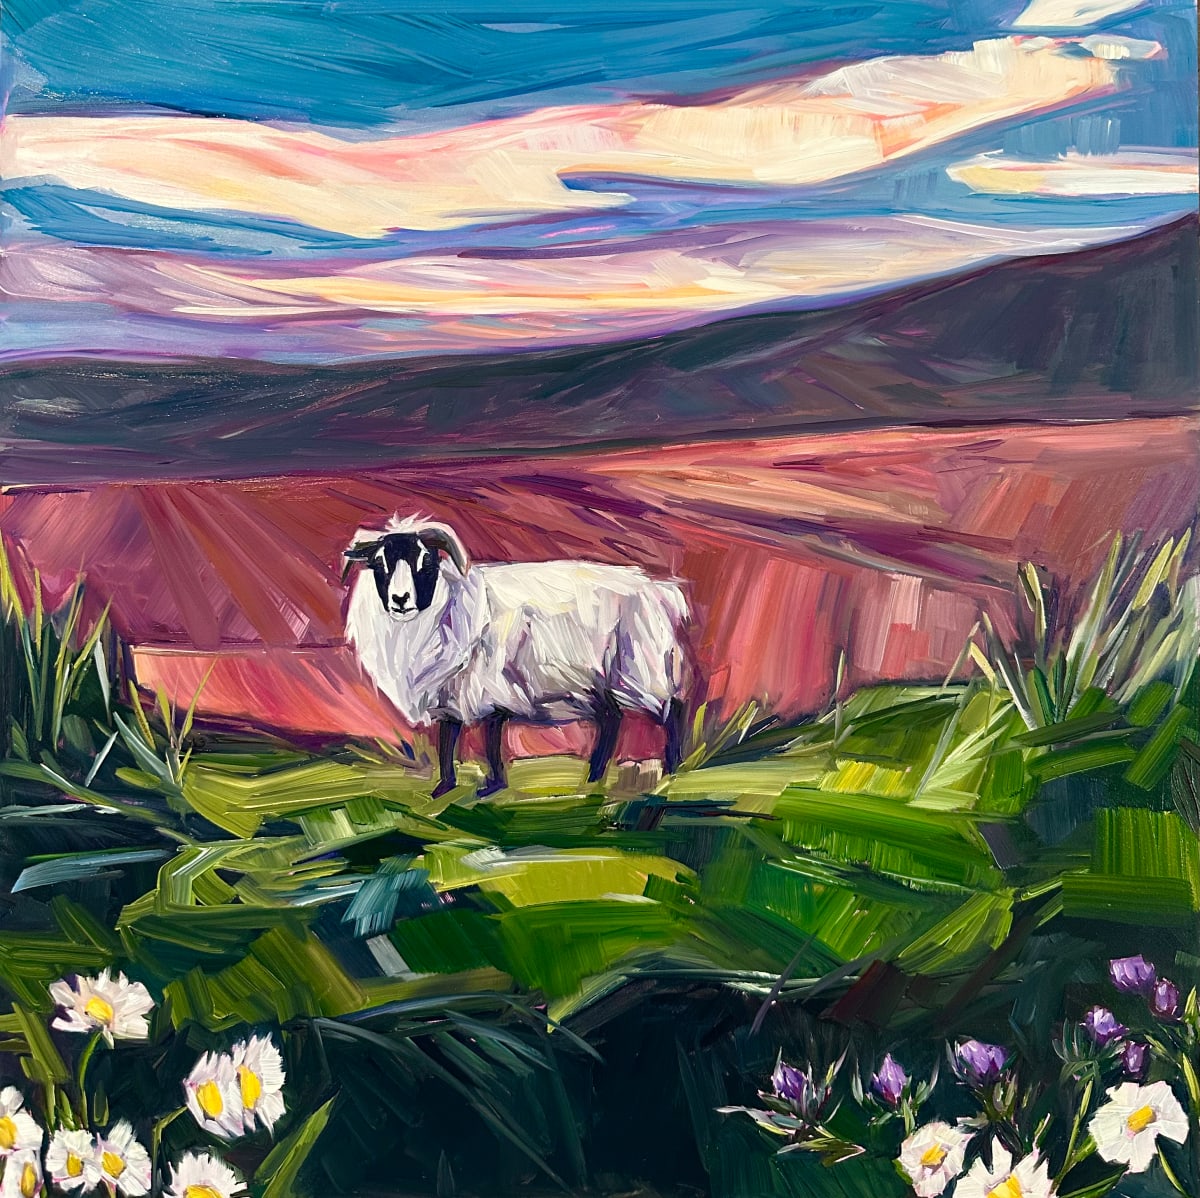 Donegal Sheep by Andrea Nova  Image: I typically avoid placing my subjects directly in the center, but even with the vibrant enhanced colors of this Irish landscape, this woolly beauty demanded attention no matter where hewas placed. So, I allowed him to take center stage, right in the middle.